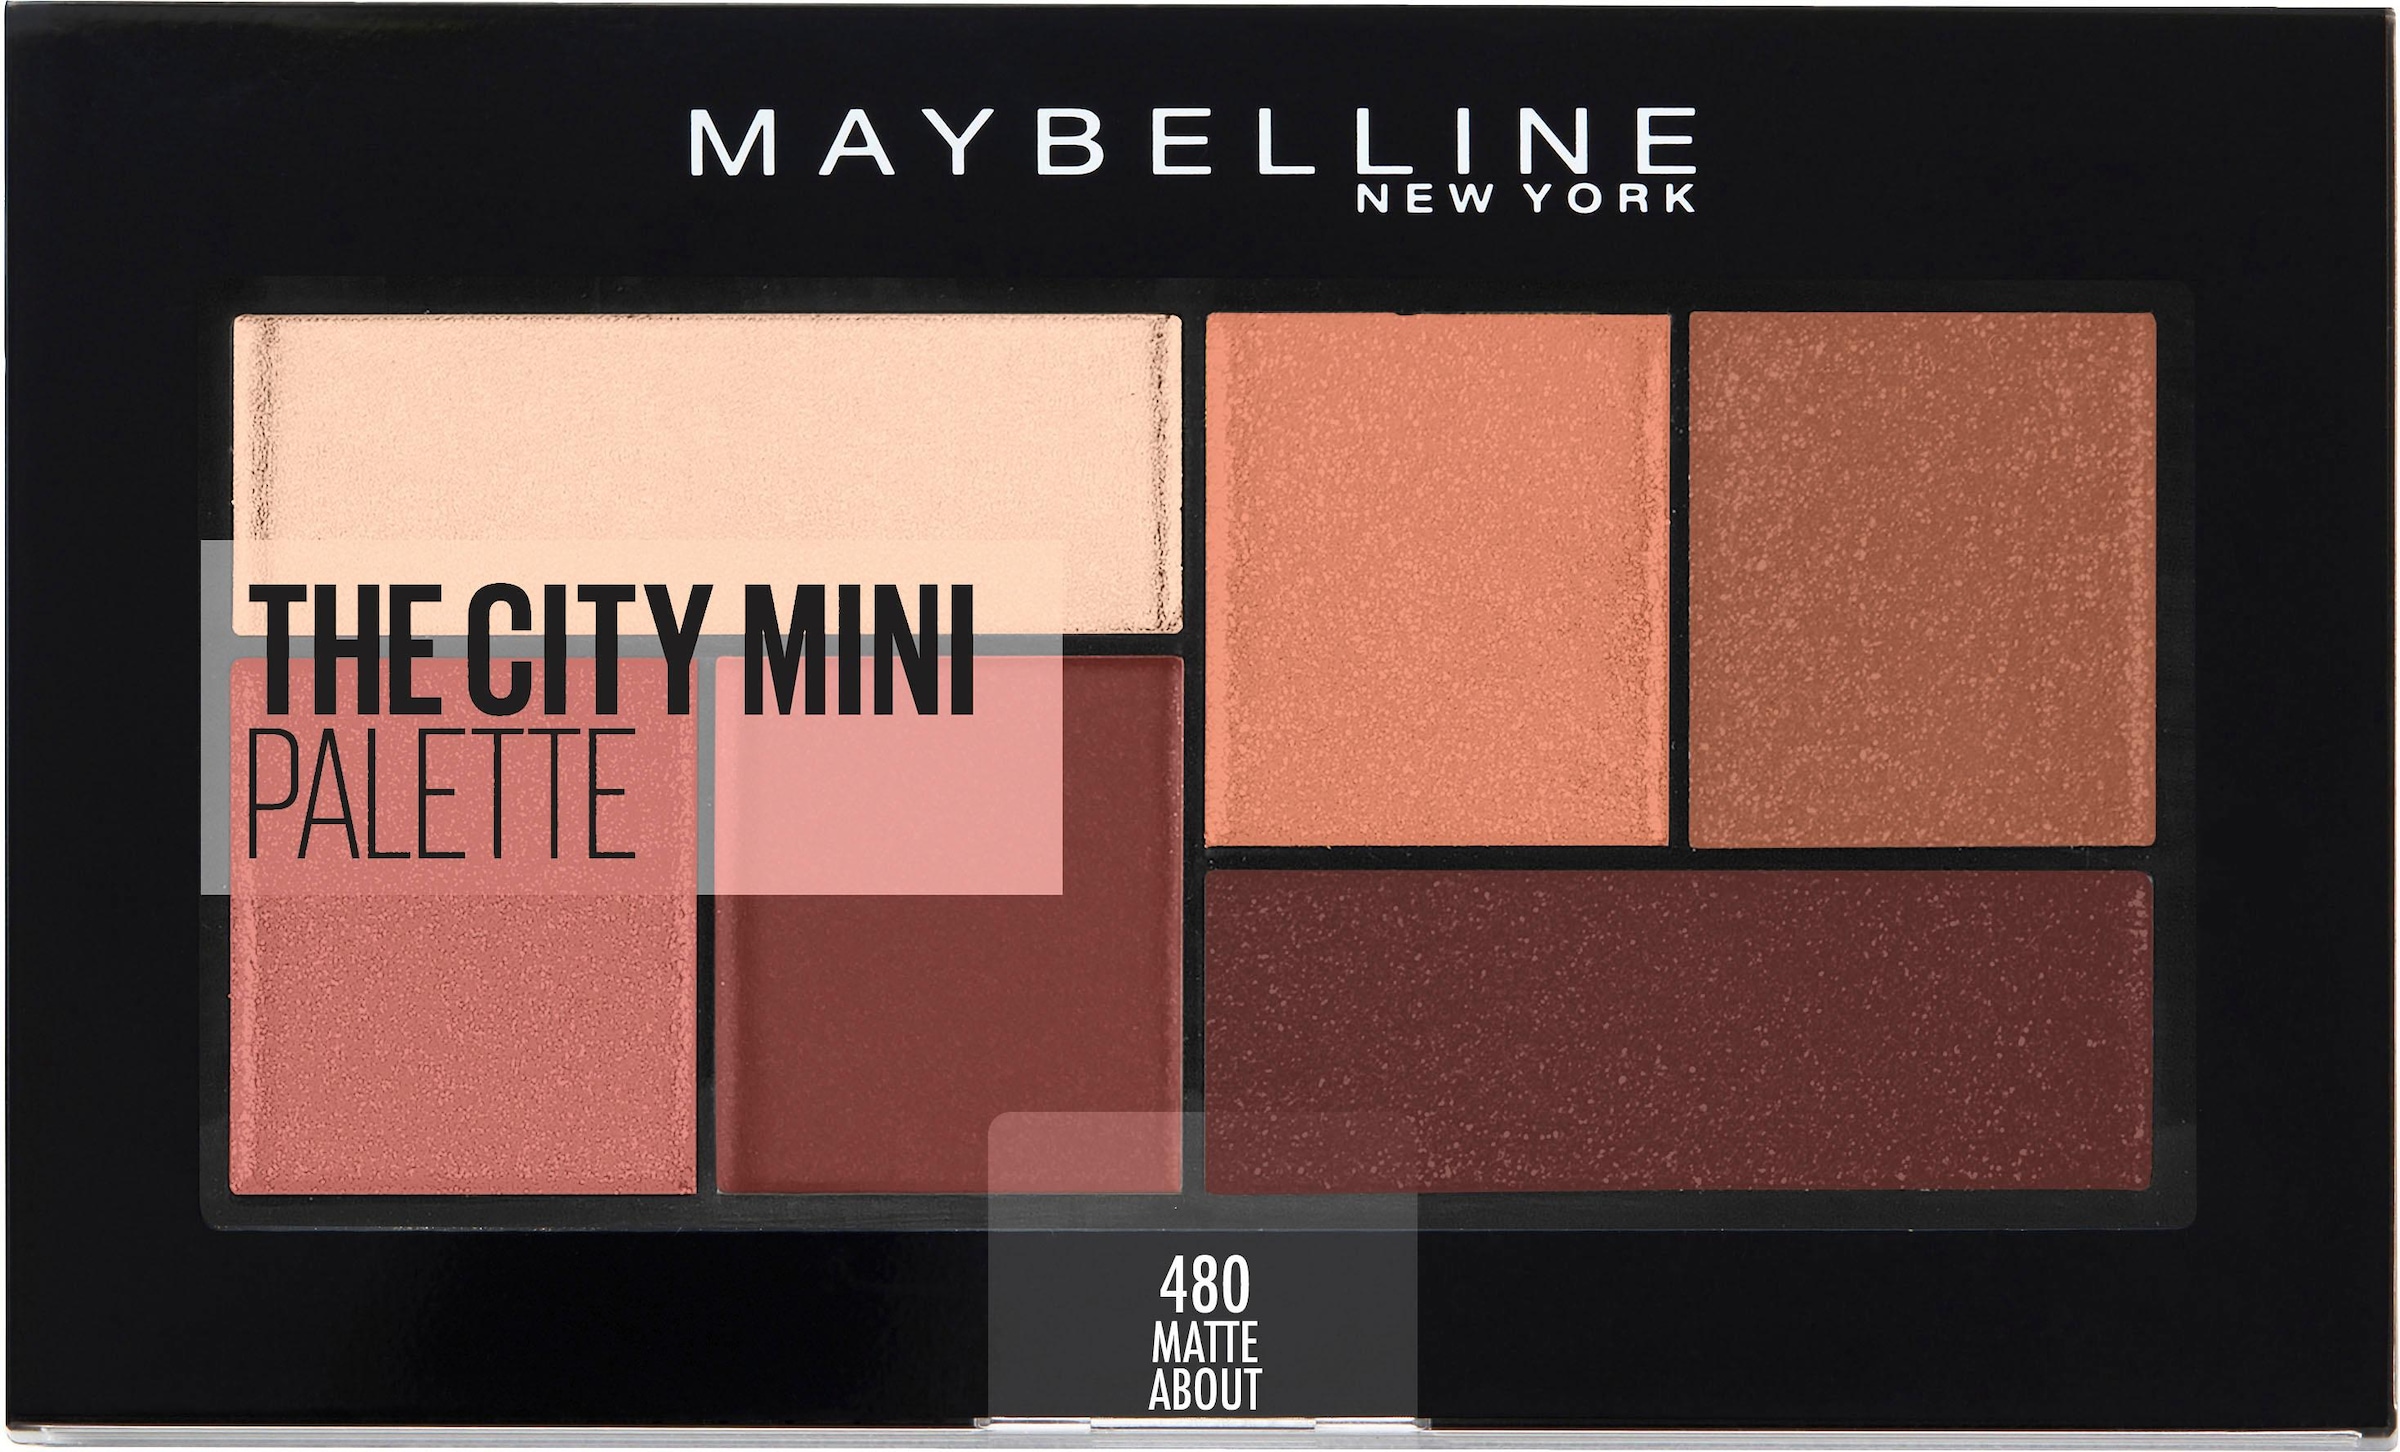 NEW bei About YORK ♕ Matte Mini«, MAYBELLINE »The City Town Lidschatten-Palette